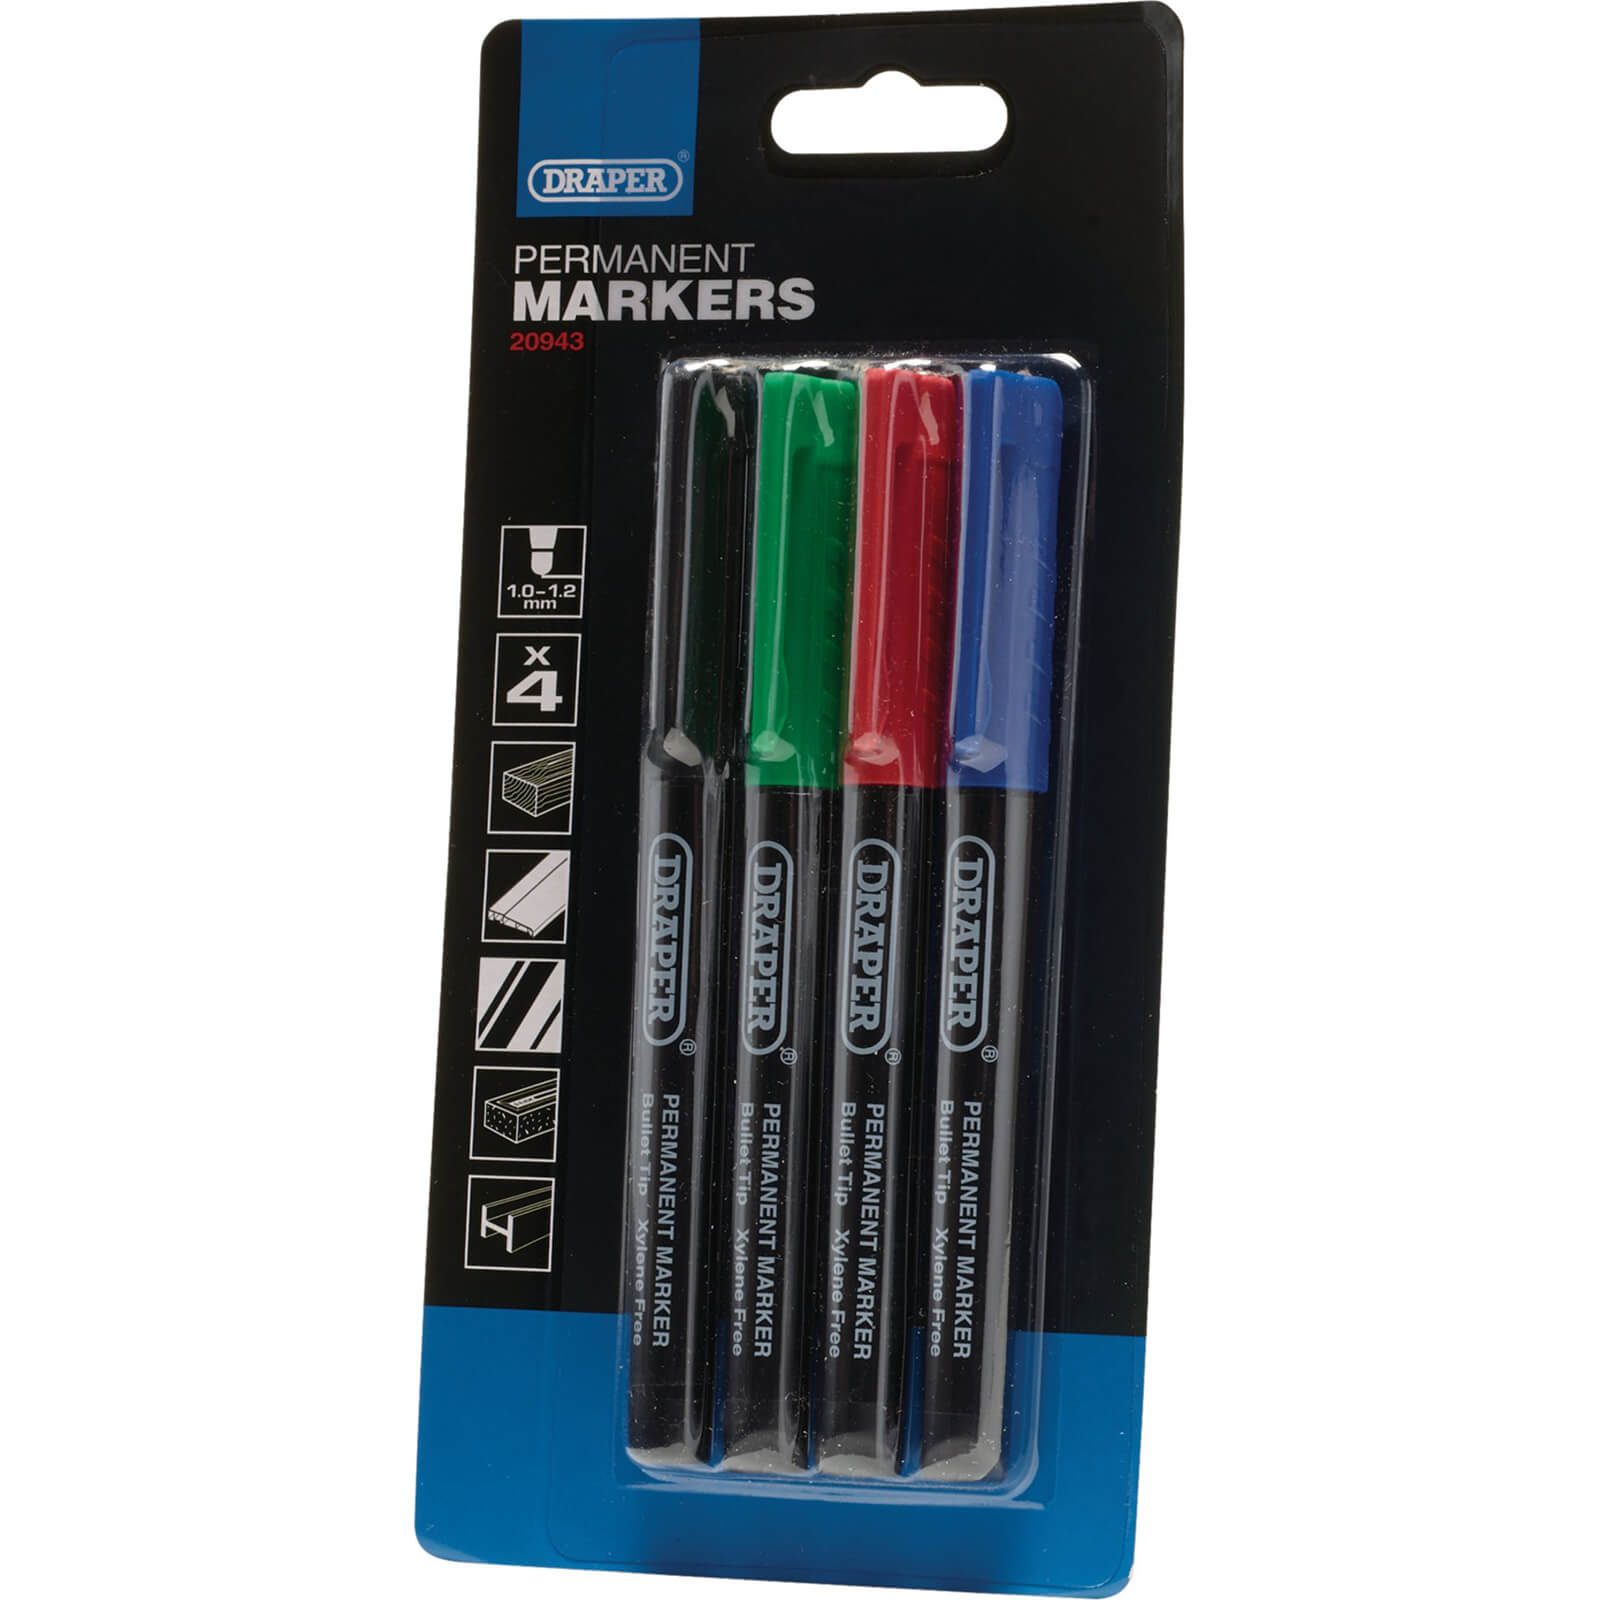 Image of Draper Permanent Marker Pen Assorted Pack of 4